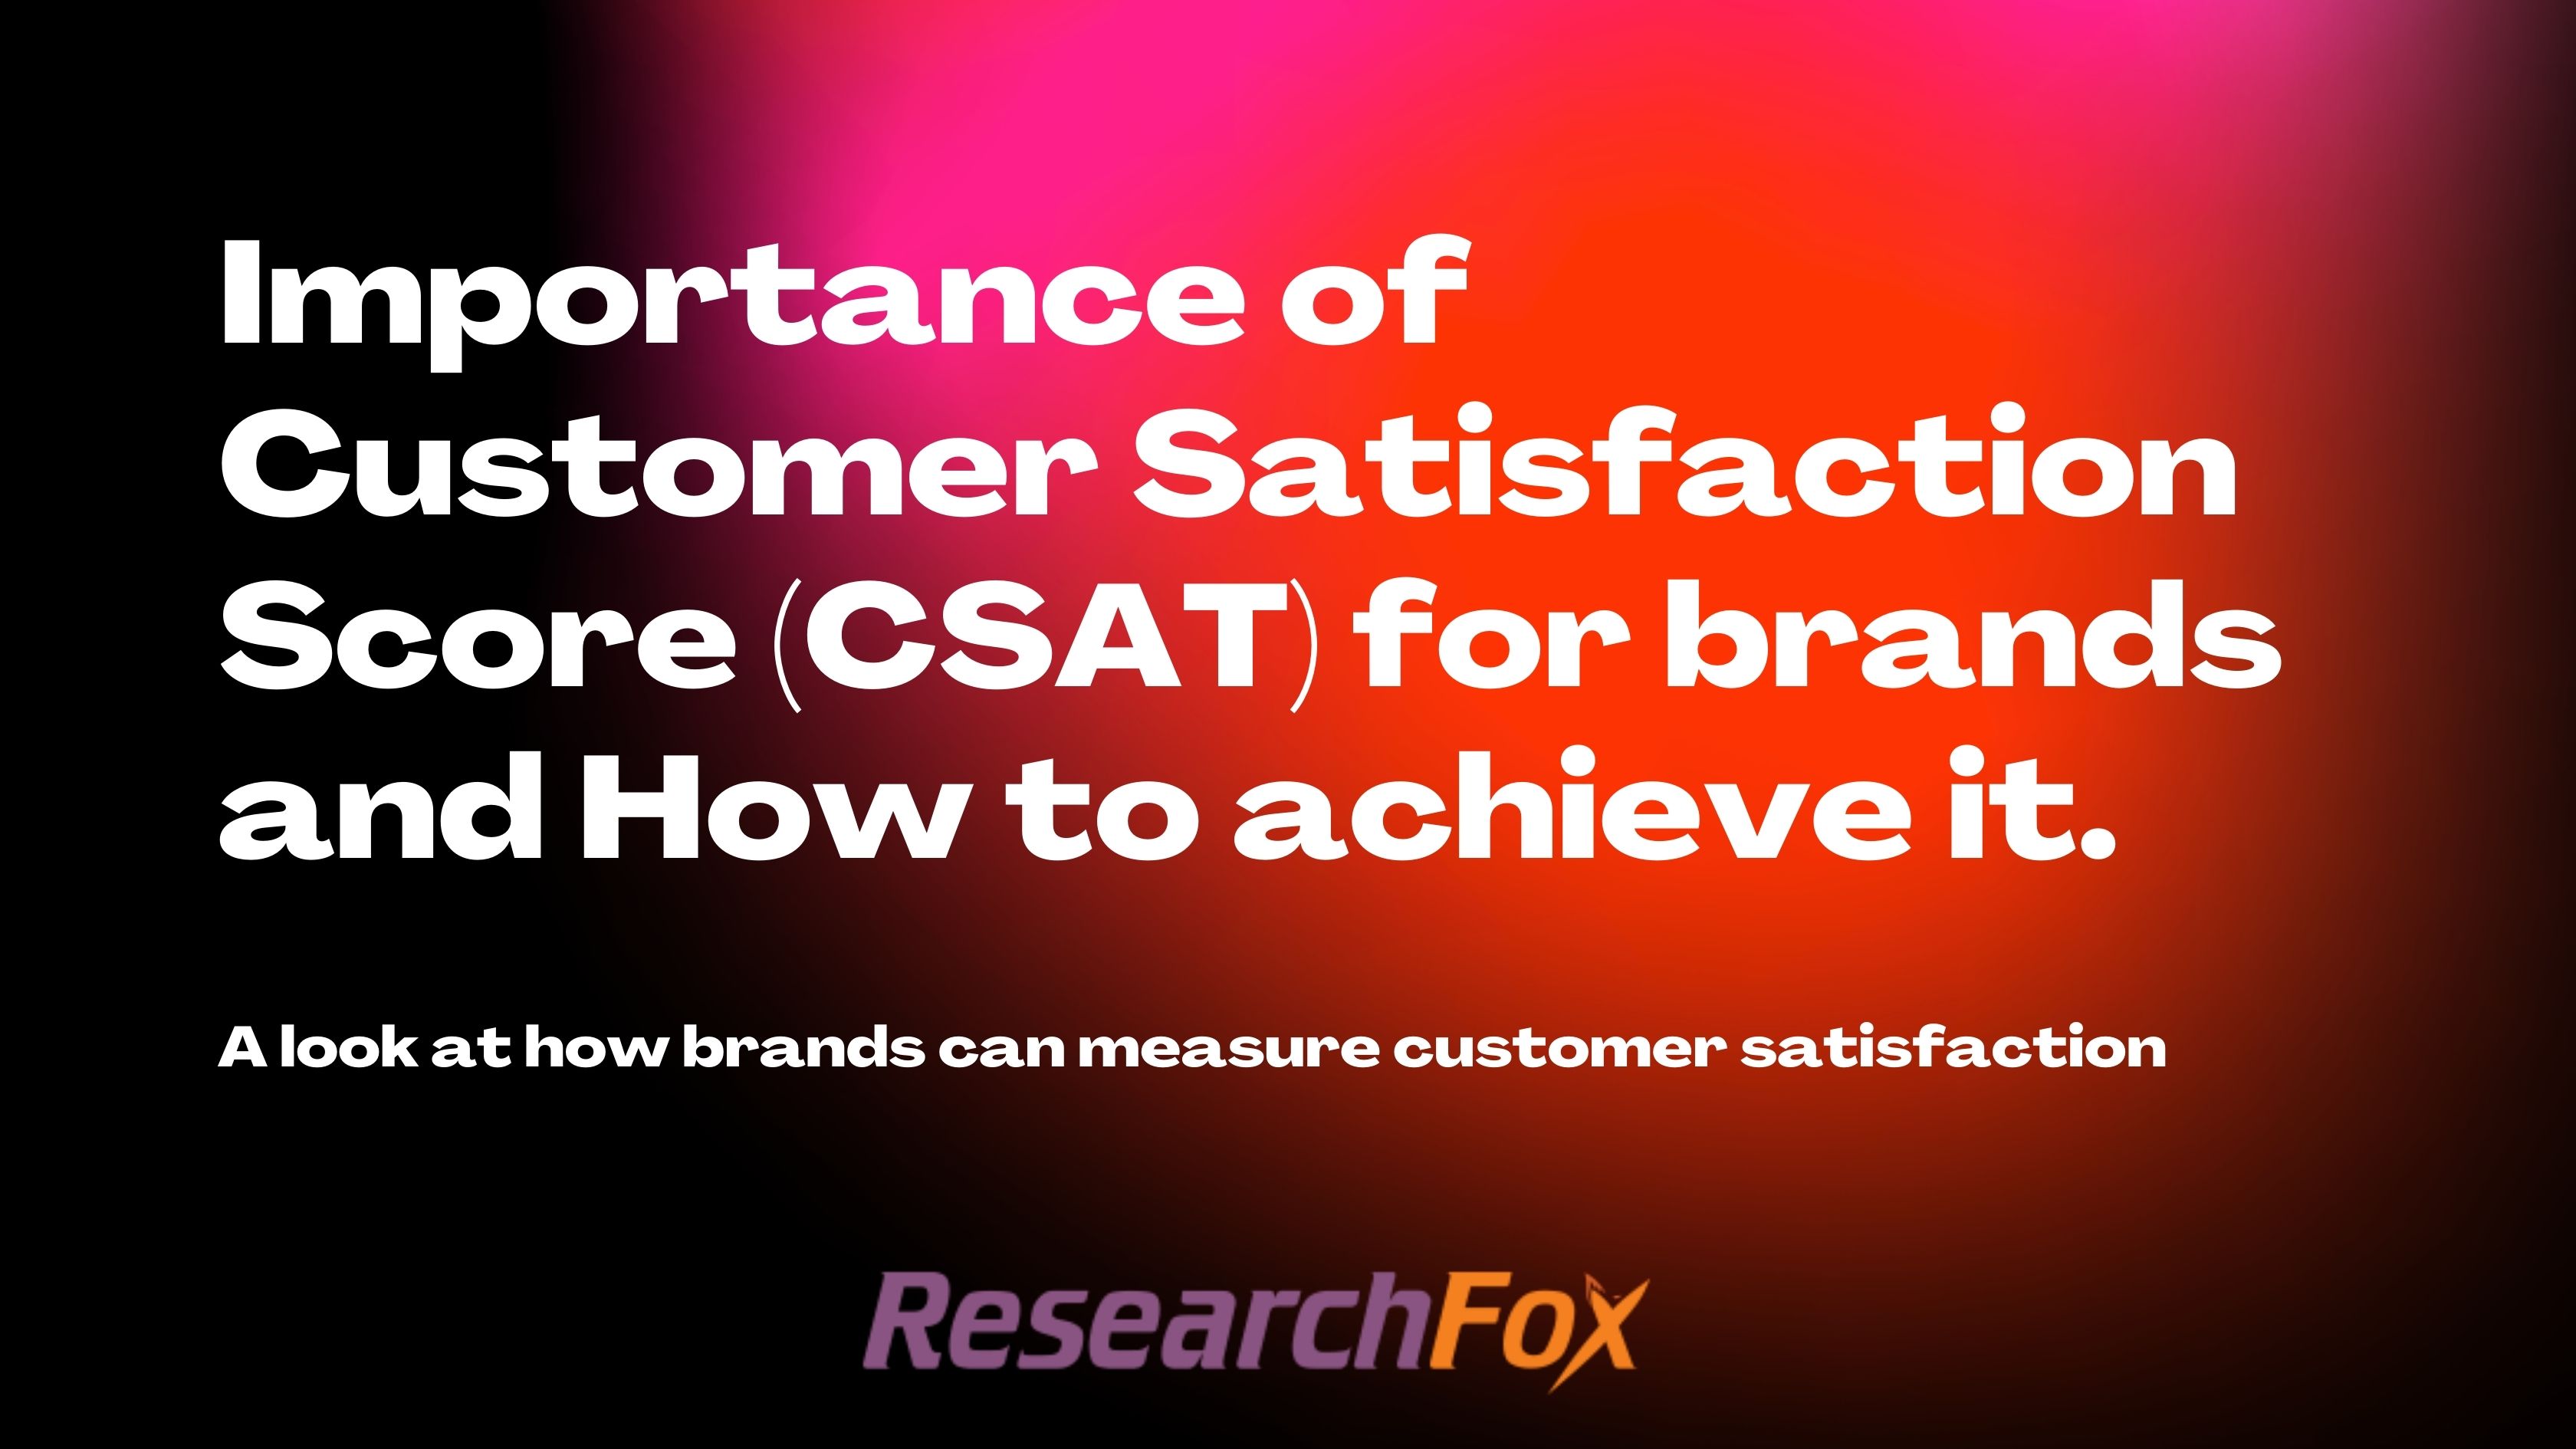 Importance of customer satisfaction for brands